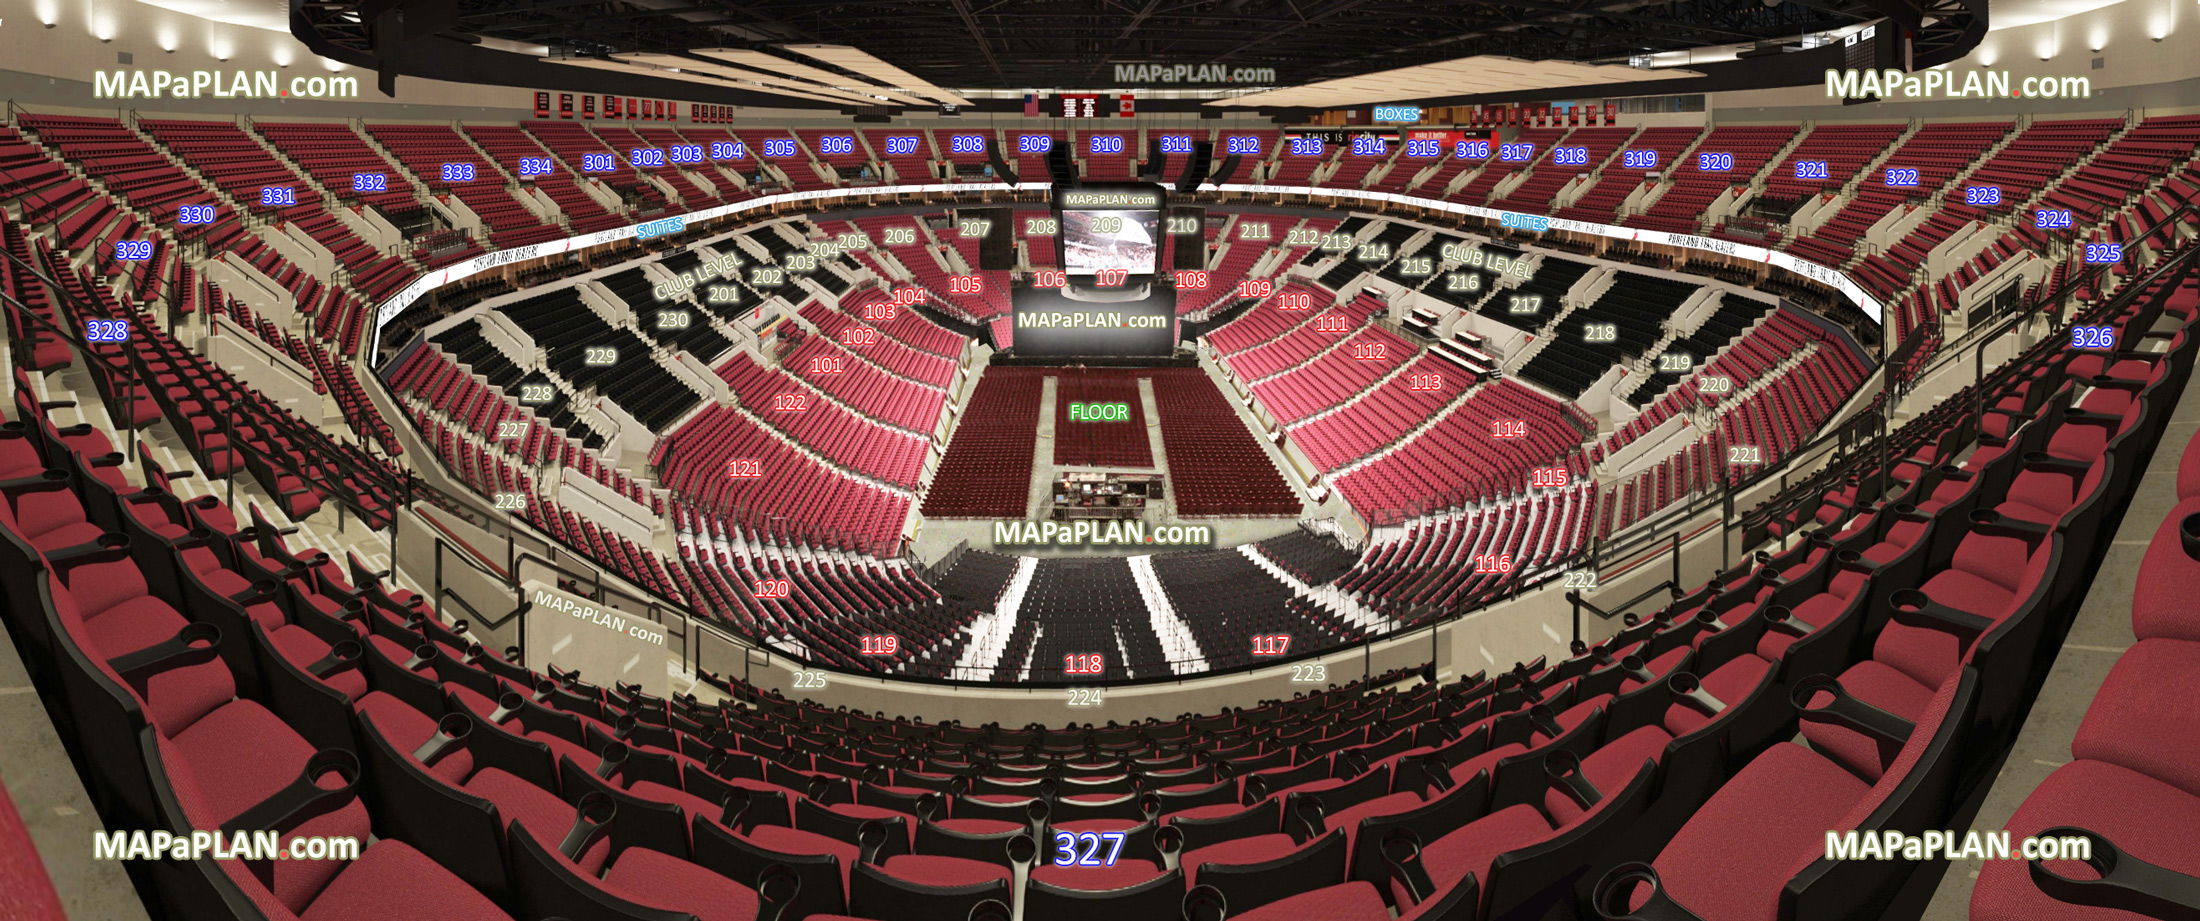 sammensmeltning Fascinate George Stevenson Moda Center (Rose Garden Arena) - View from Section 327 - Row O - Seat 10 - Rose  Garden Arena virtual venue 3d interactive interior tour & inside concert  stage picture showing